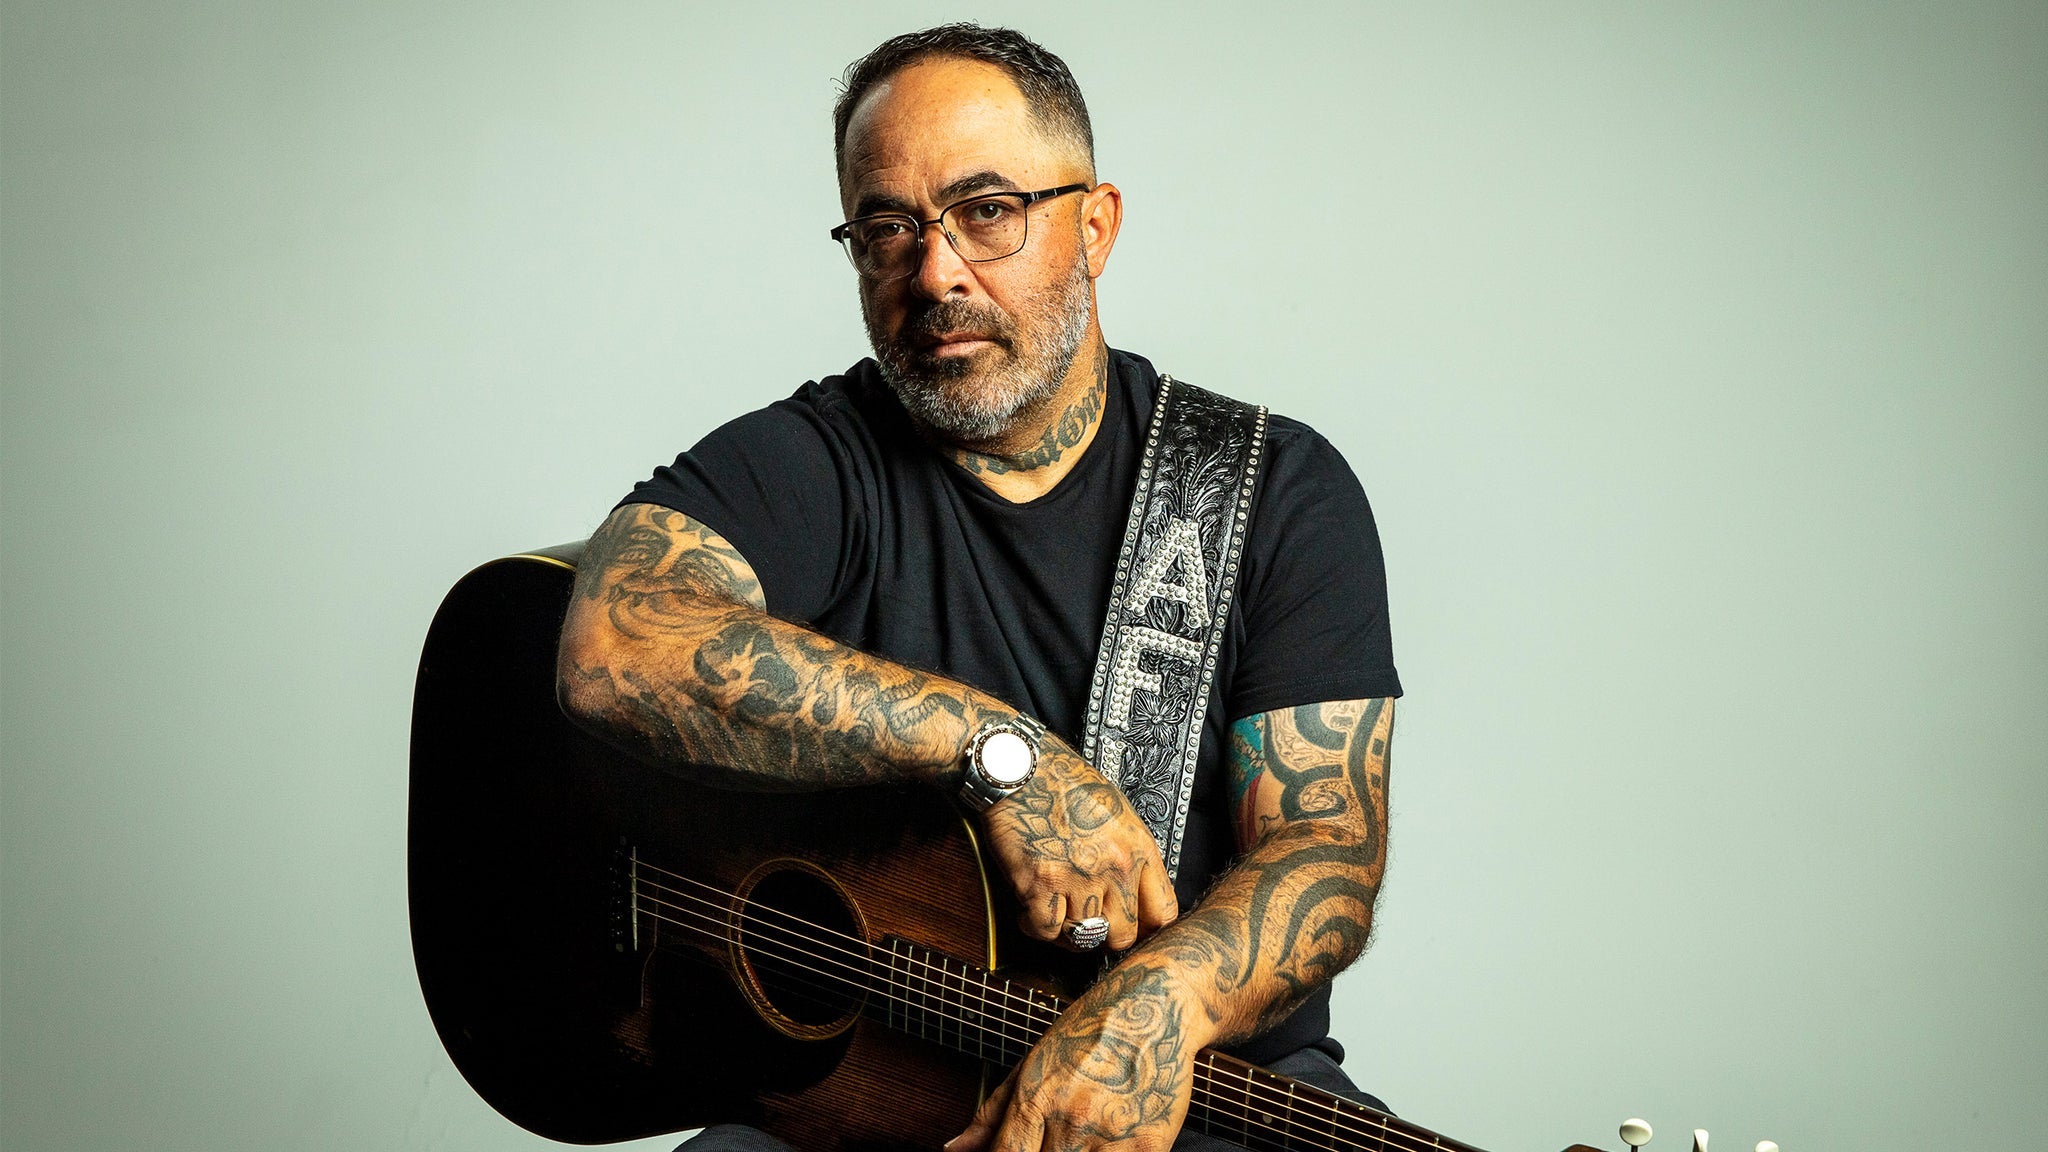 Aaron Lewis at Stiefel Theatre for the Performing Arts